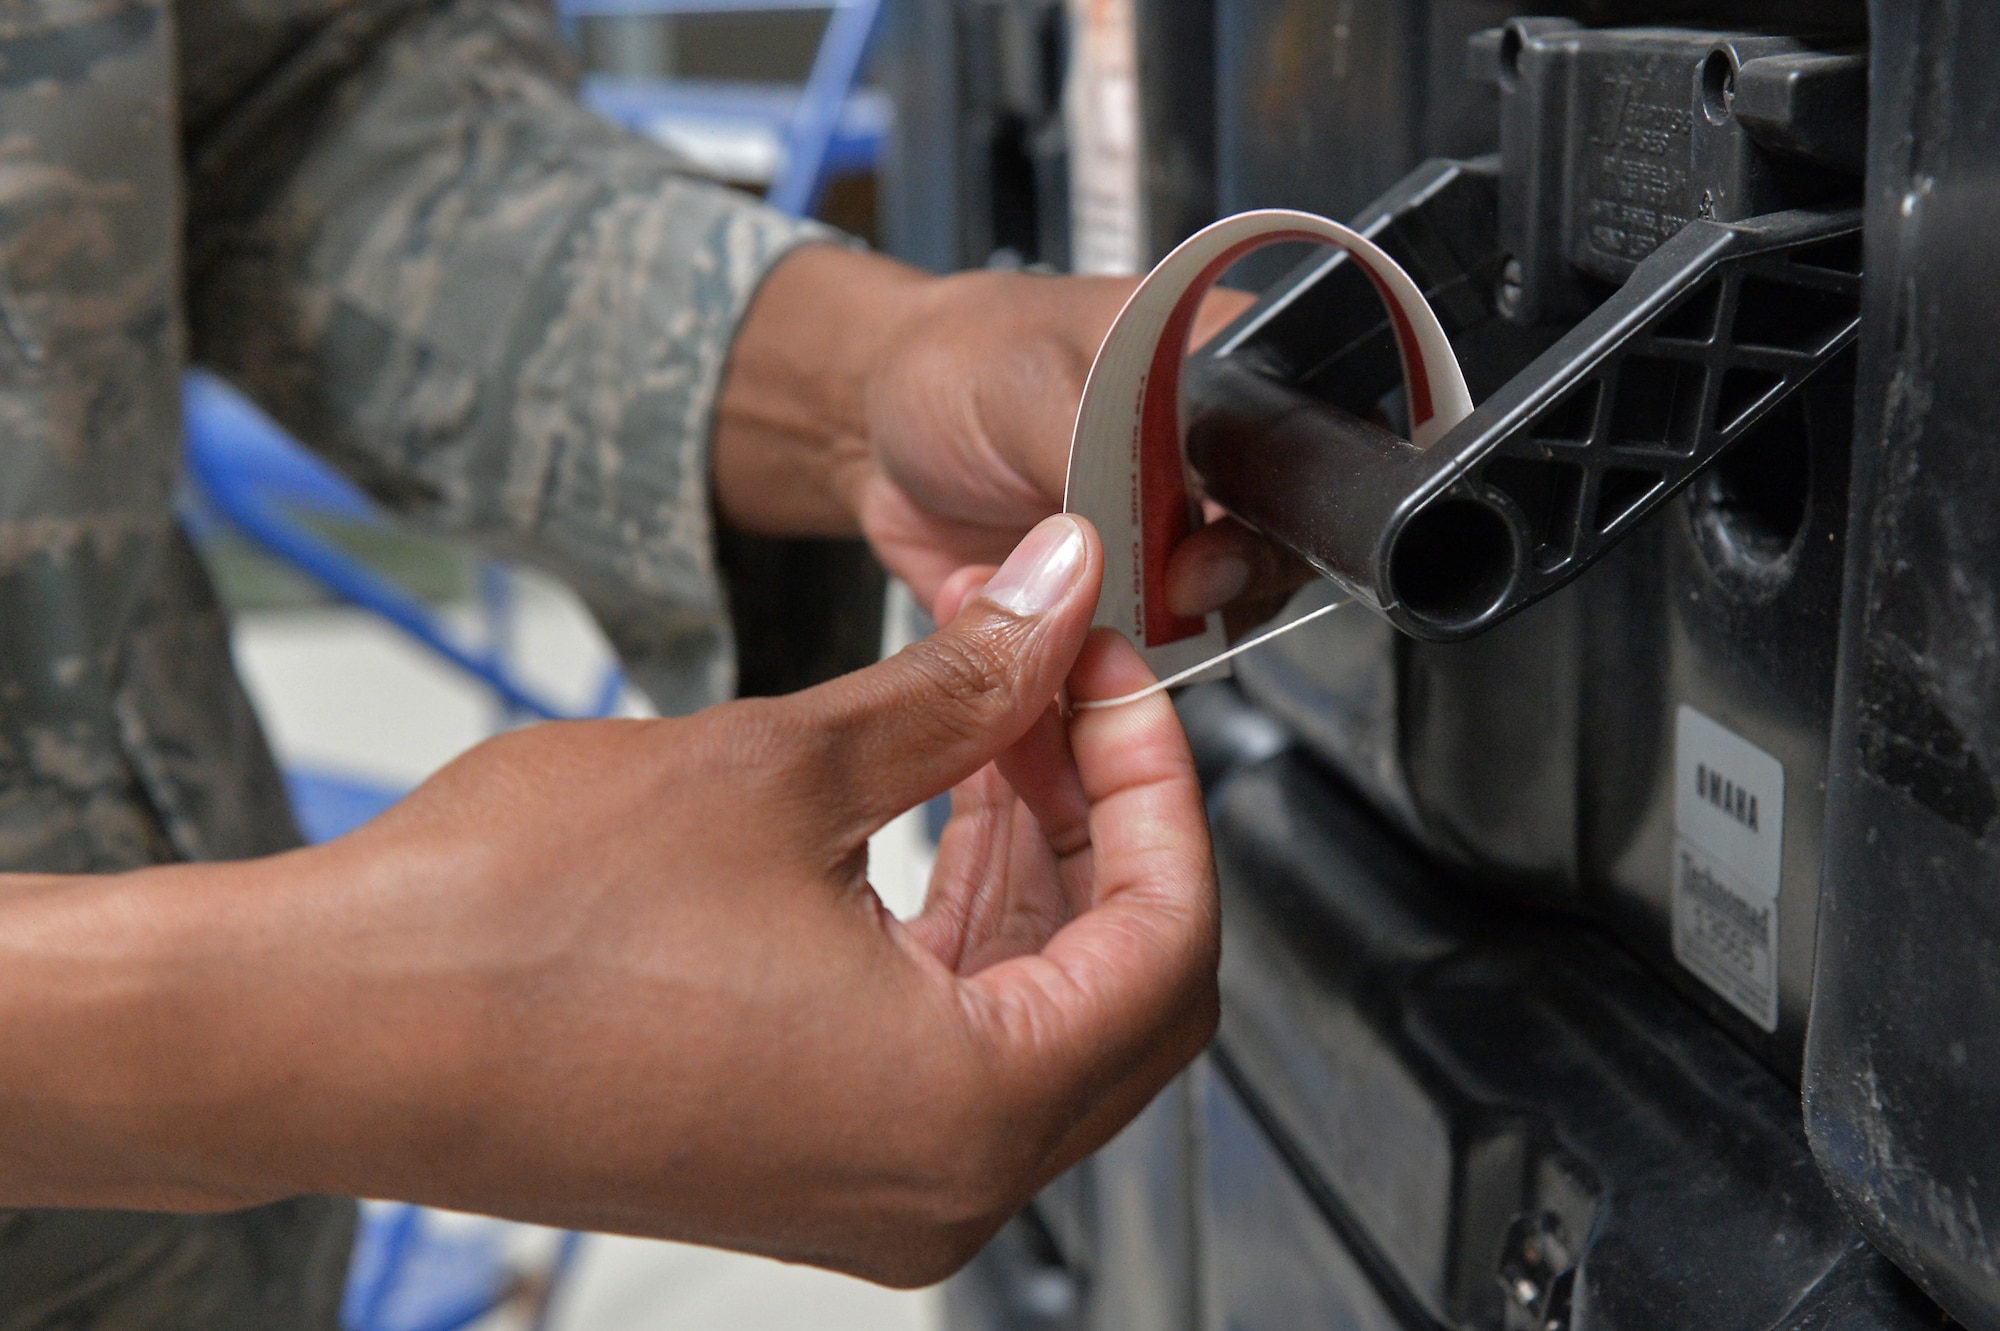 Senior Airman Howard Daniels, 1st Combat Communications Squadron radio frequency transmissions journeyman, tags faulty equipment on Ramstein Air Base, Germany, March 25, 2013. Daniels was recently awarded the Thunderbolt award for his superior achievements and work performance. (U.S. Air Force photo/Airman 1st Class Holly Cook) 